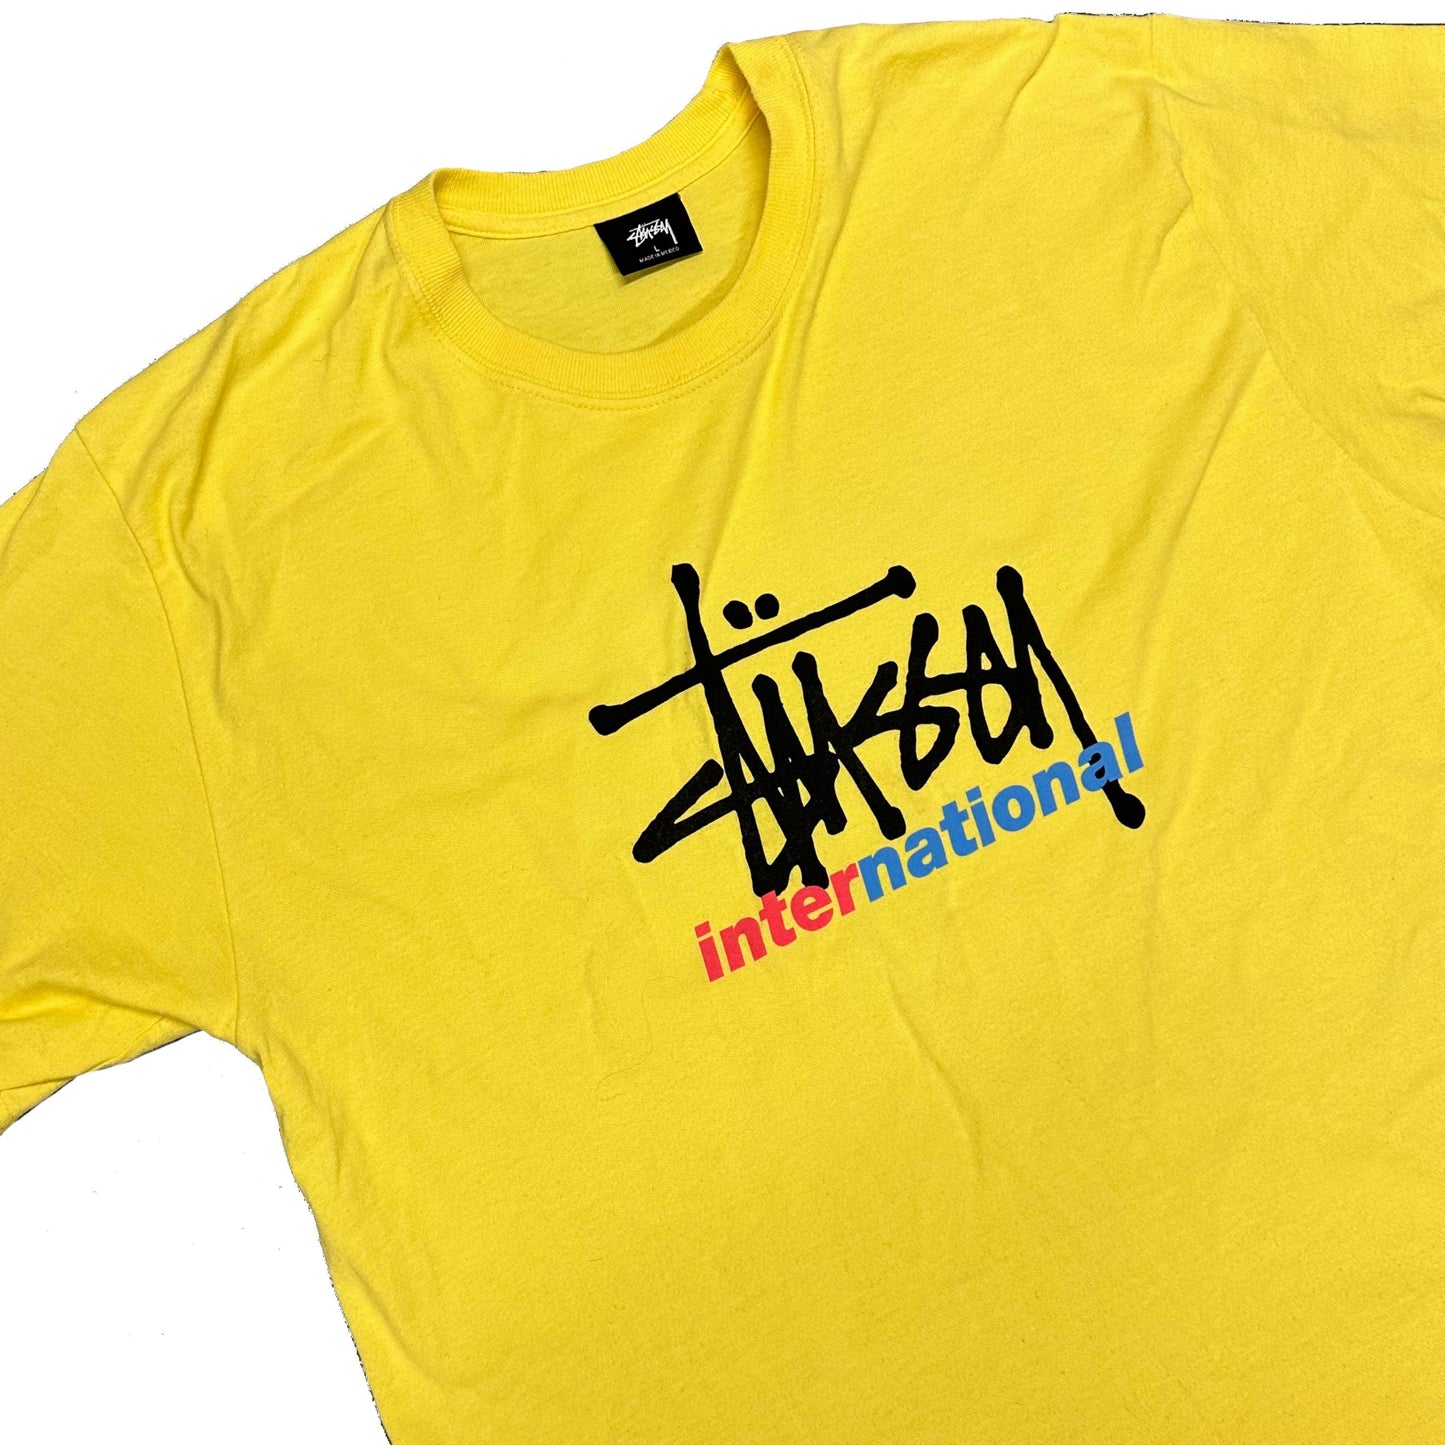 Stüssy International Spellout T-Shirt In Yellow ( L ) - Known Source